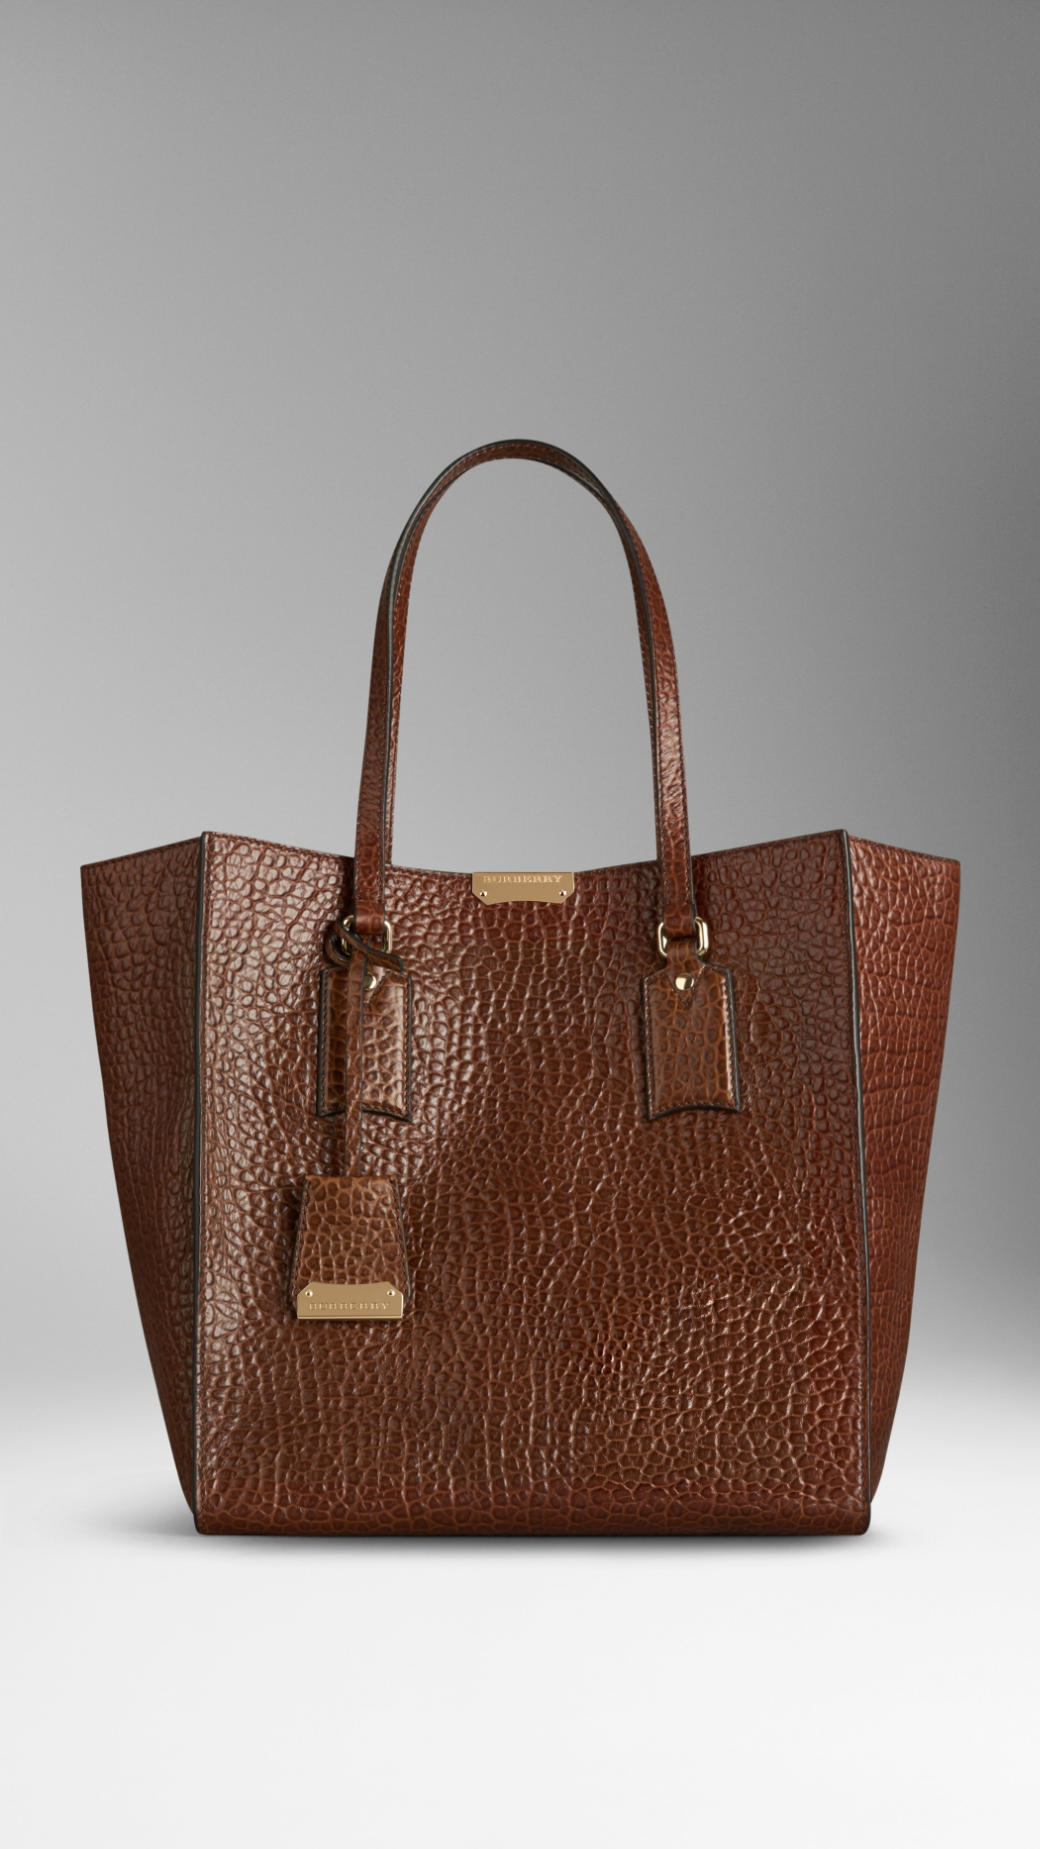 Burberry Medium Heritage Grain Leather Tote Bag in Brown (flax) | Lyst